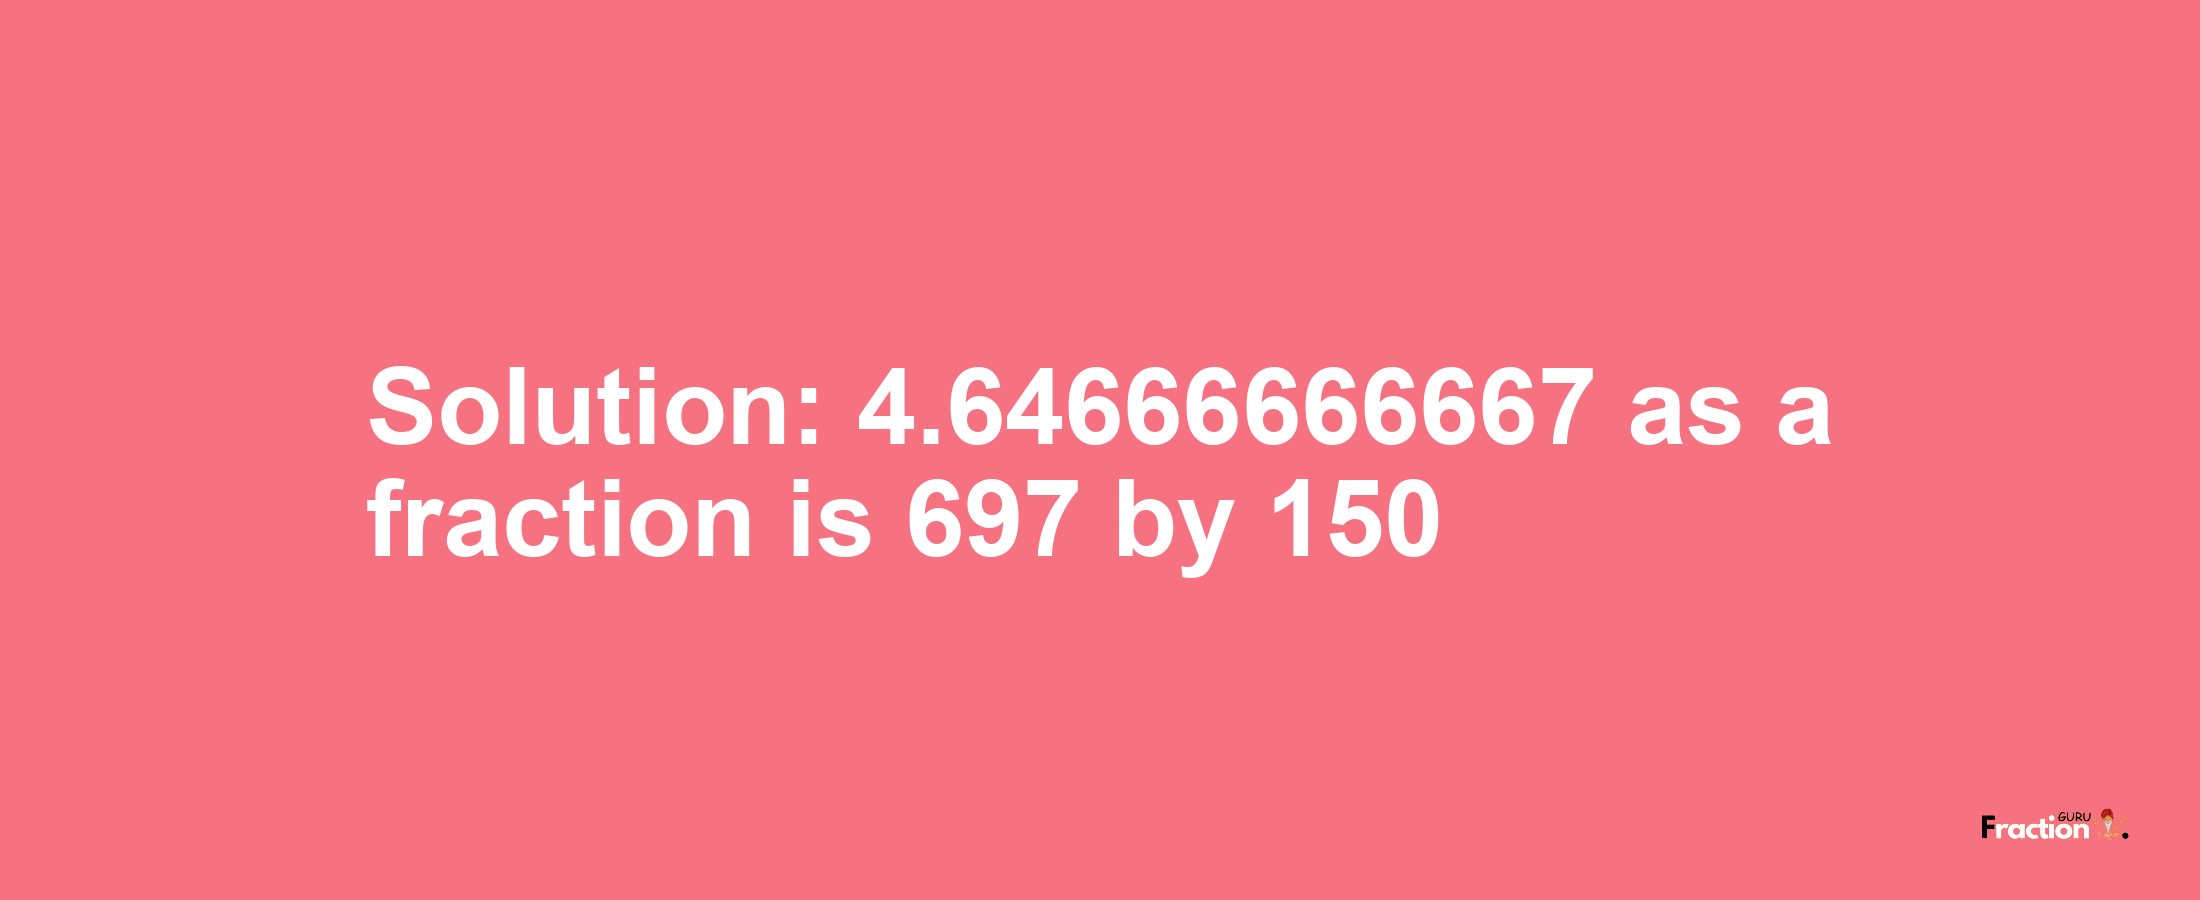 Solution:4.64666666667 as a fraction is 697/150